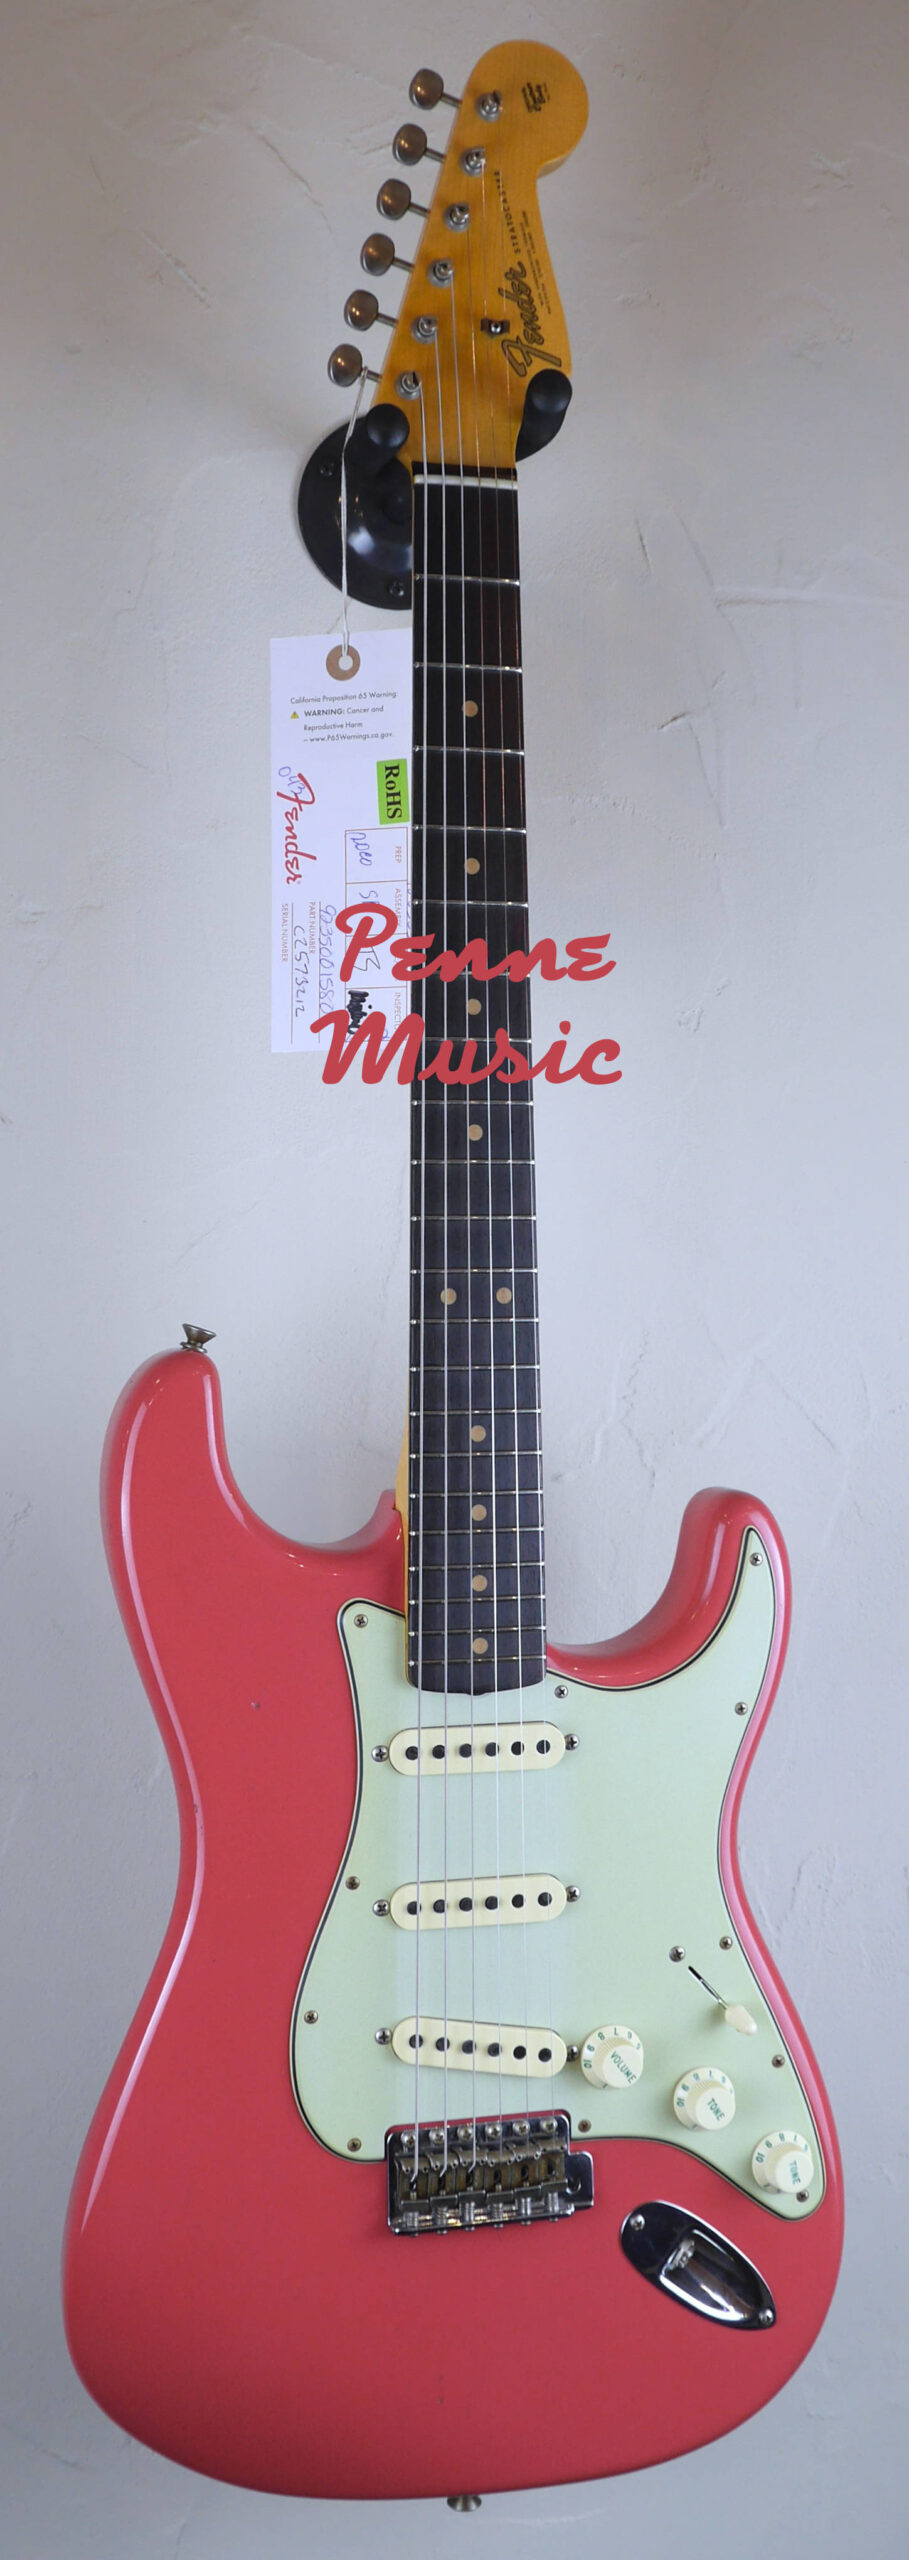 Fender Custom Shop Time Machine 1964 Stratocaster Faded Aged Fiesta Red J.Relic 2